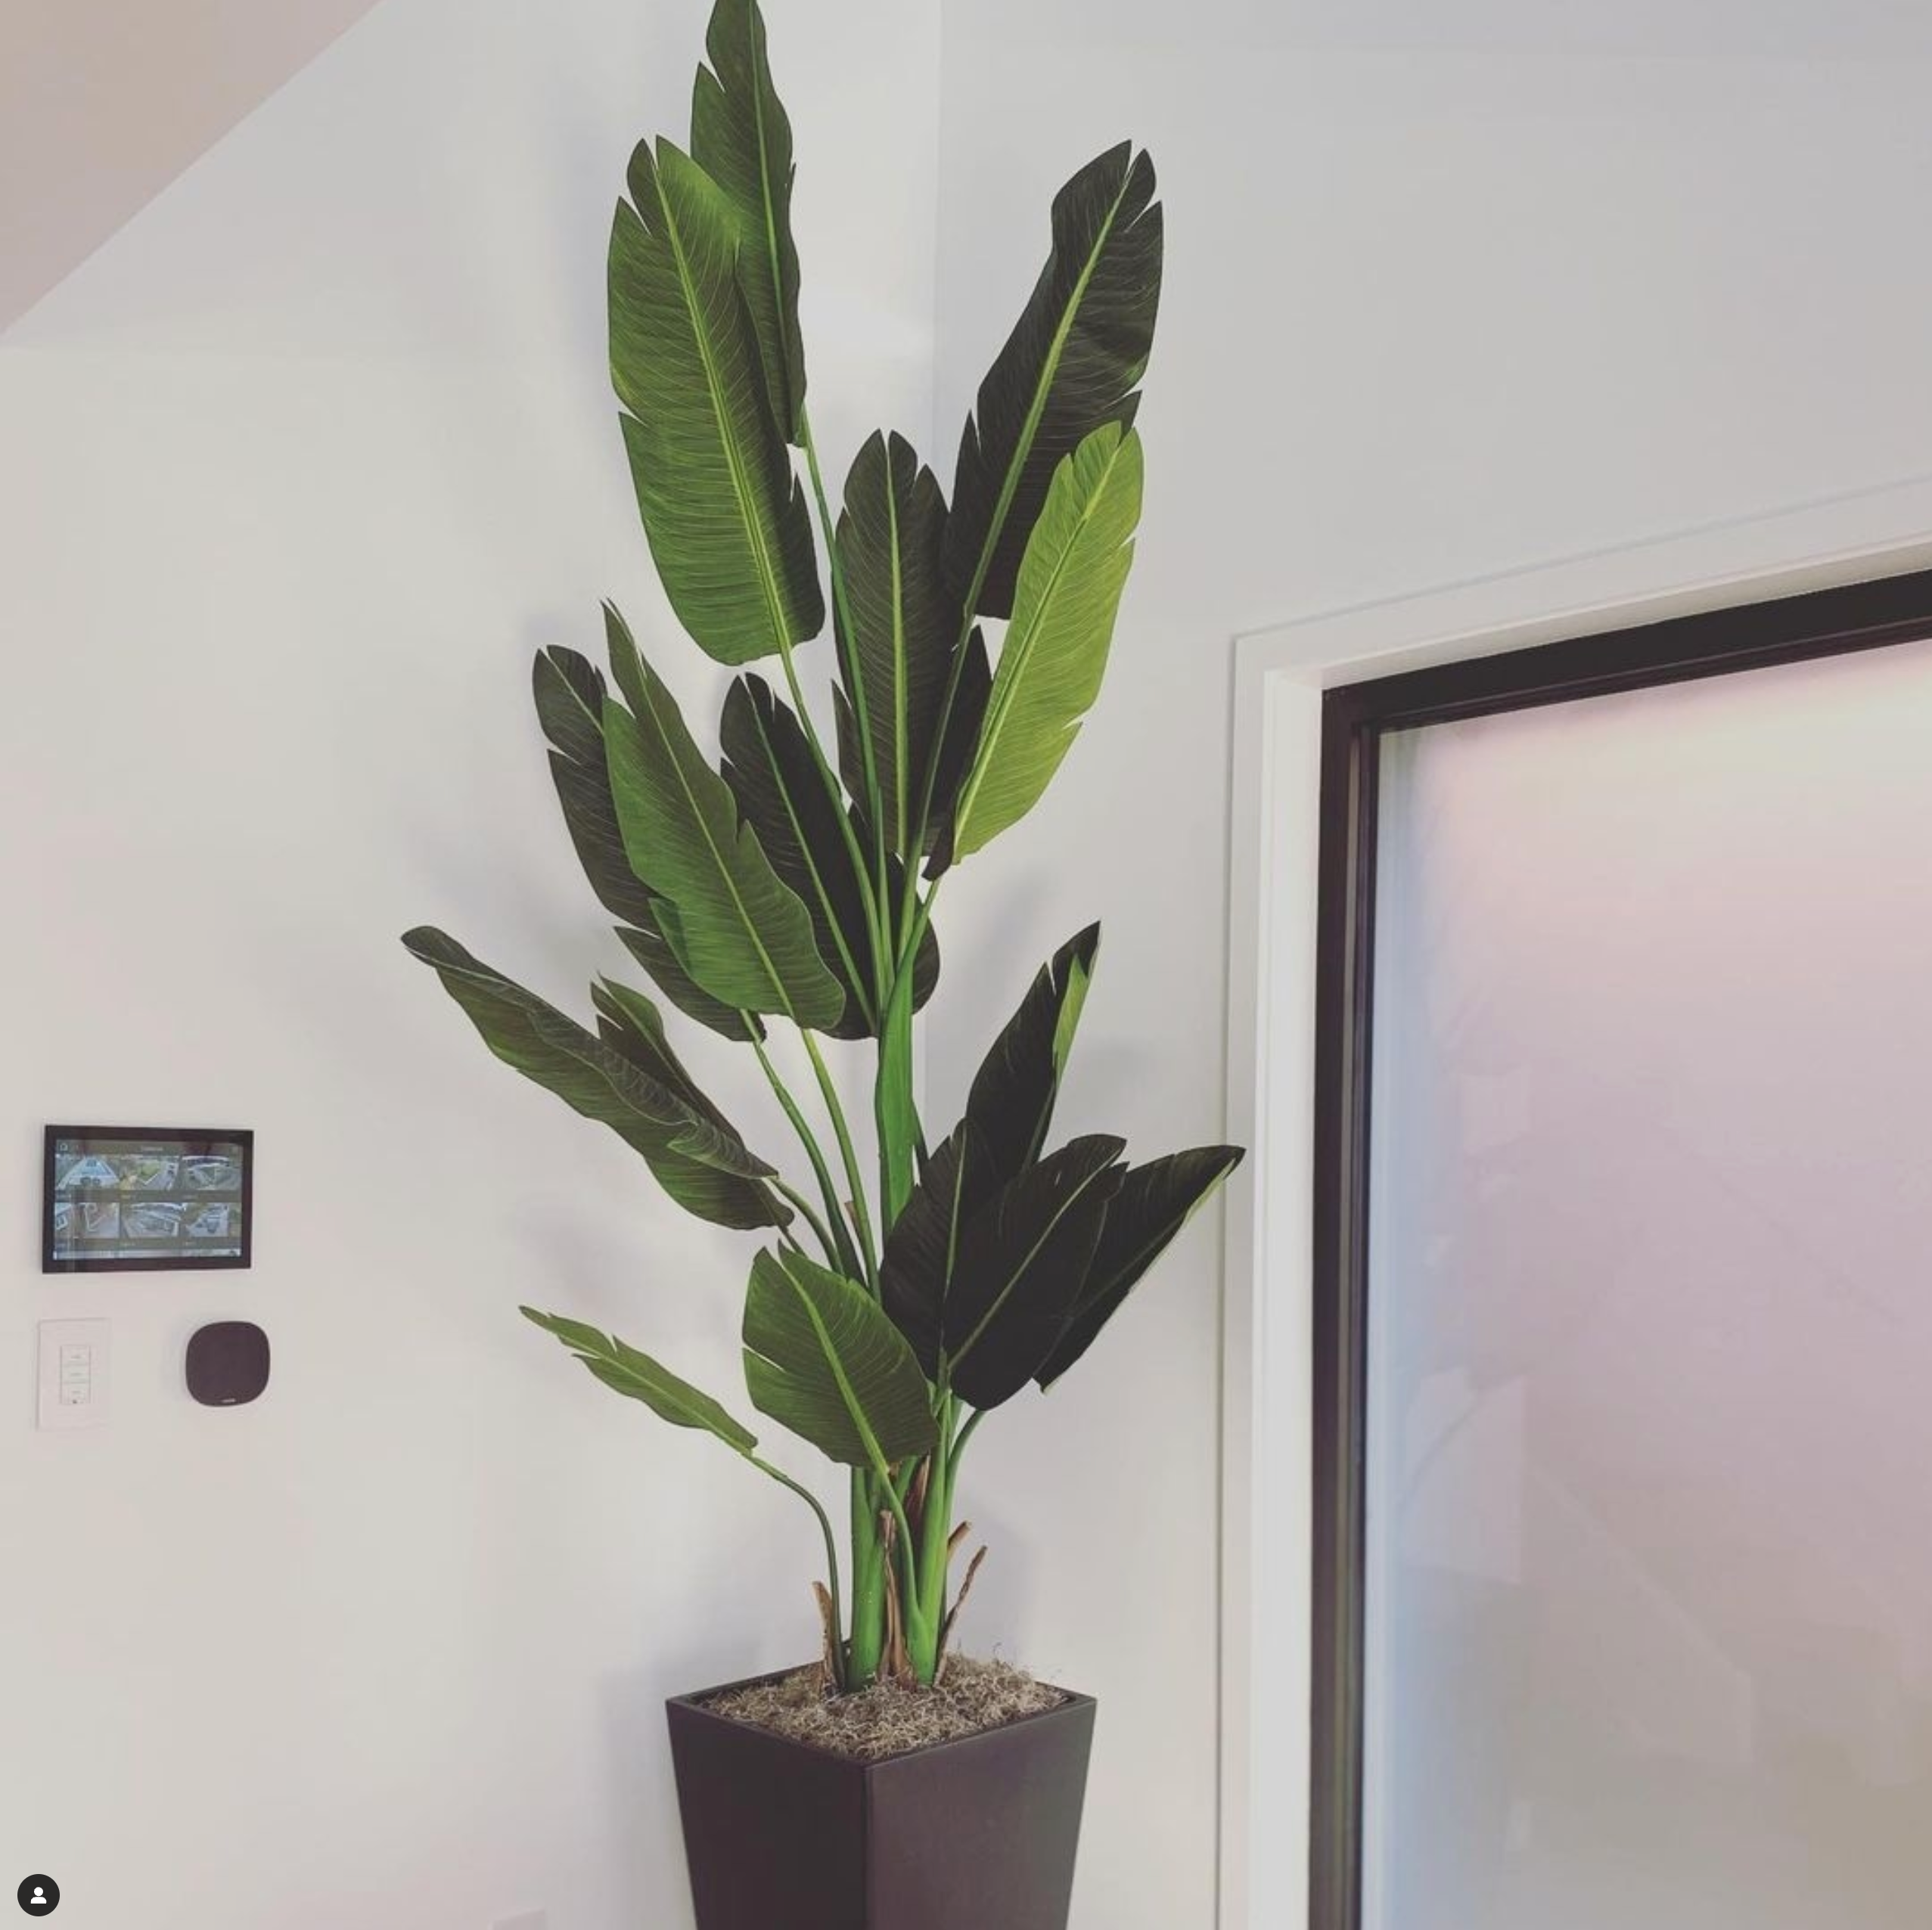 How Can You Tell The Difference Between A Real Plant And A Faux Plant?